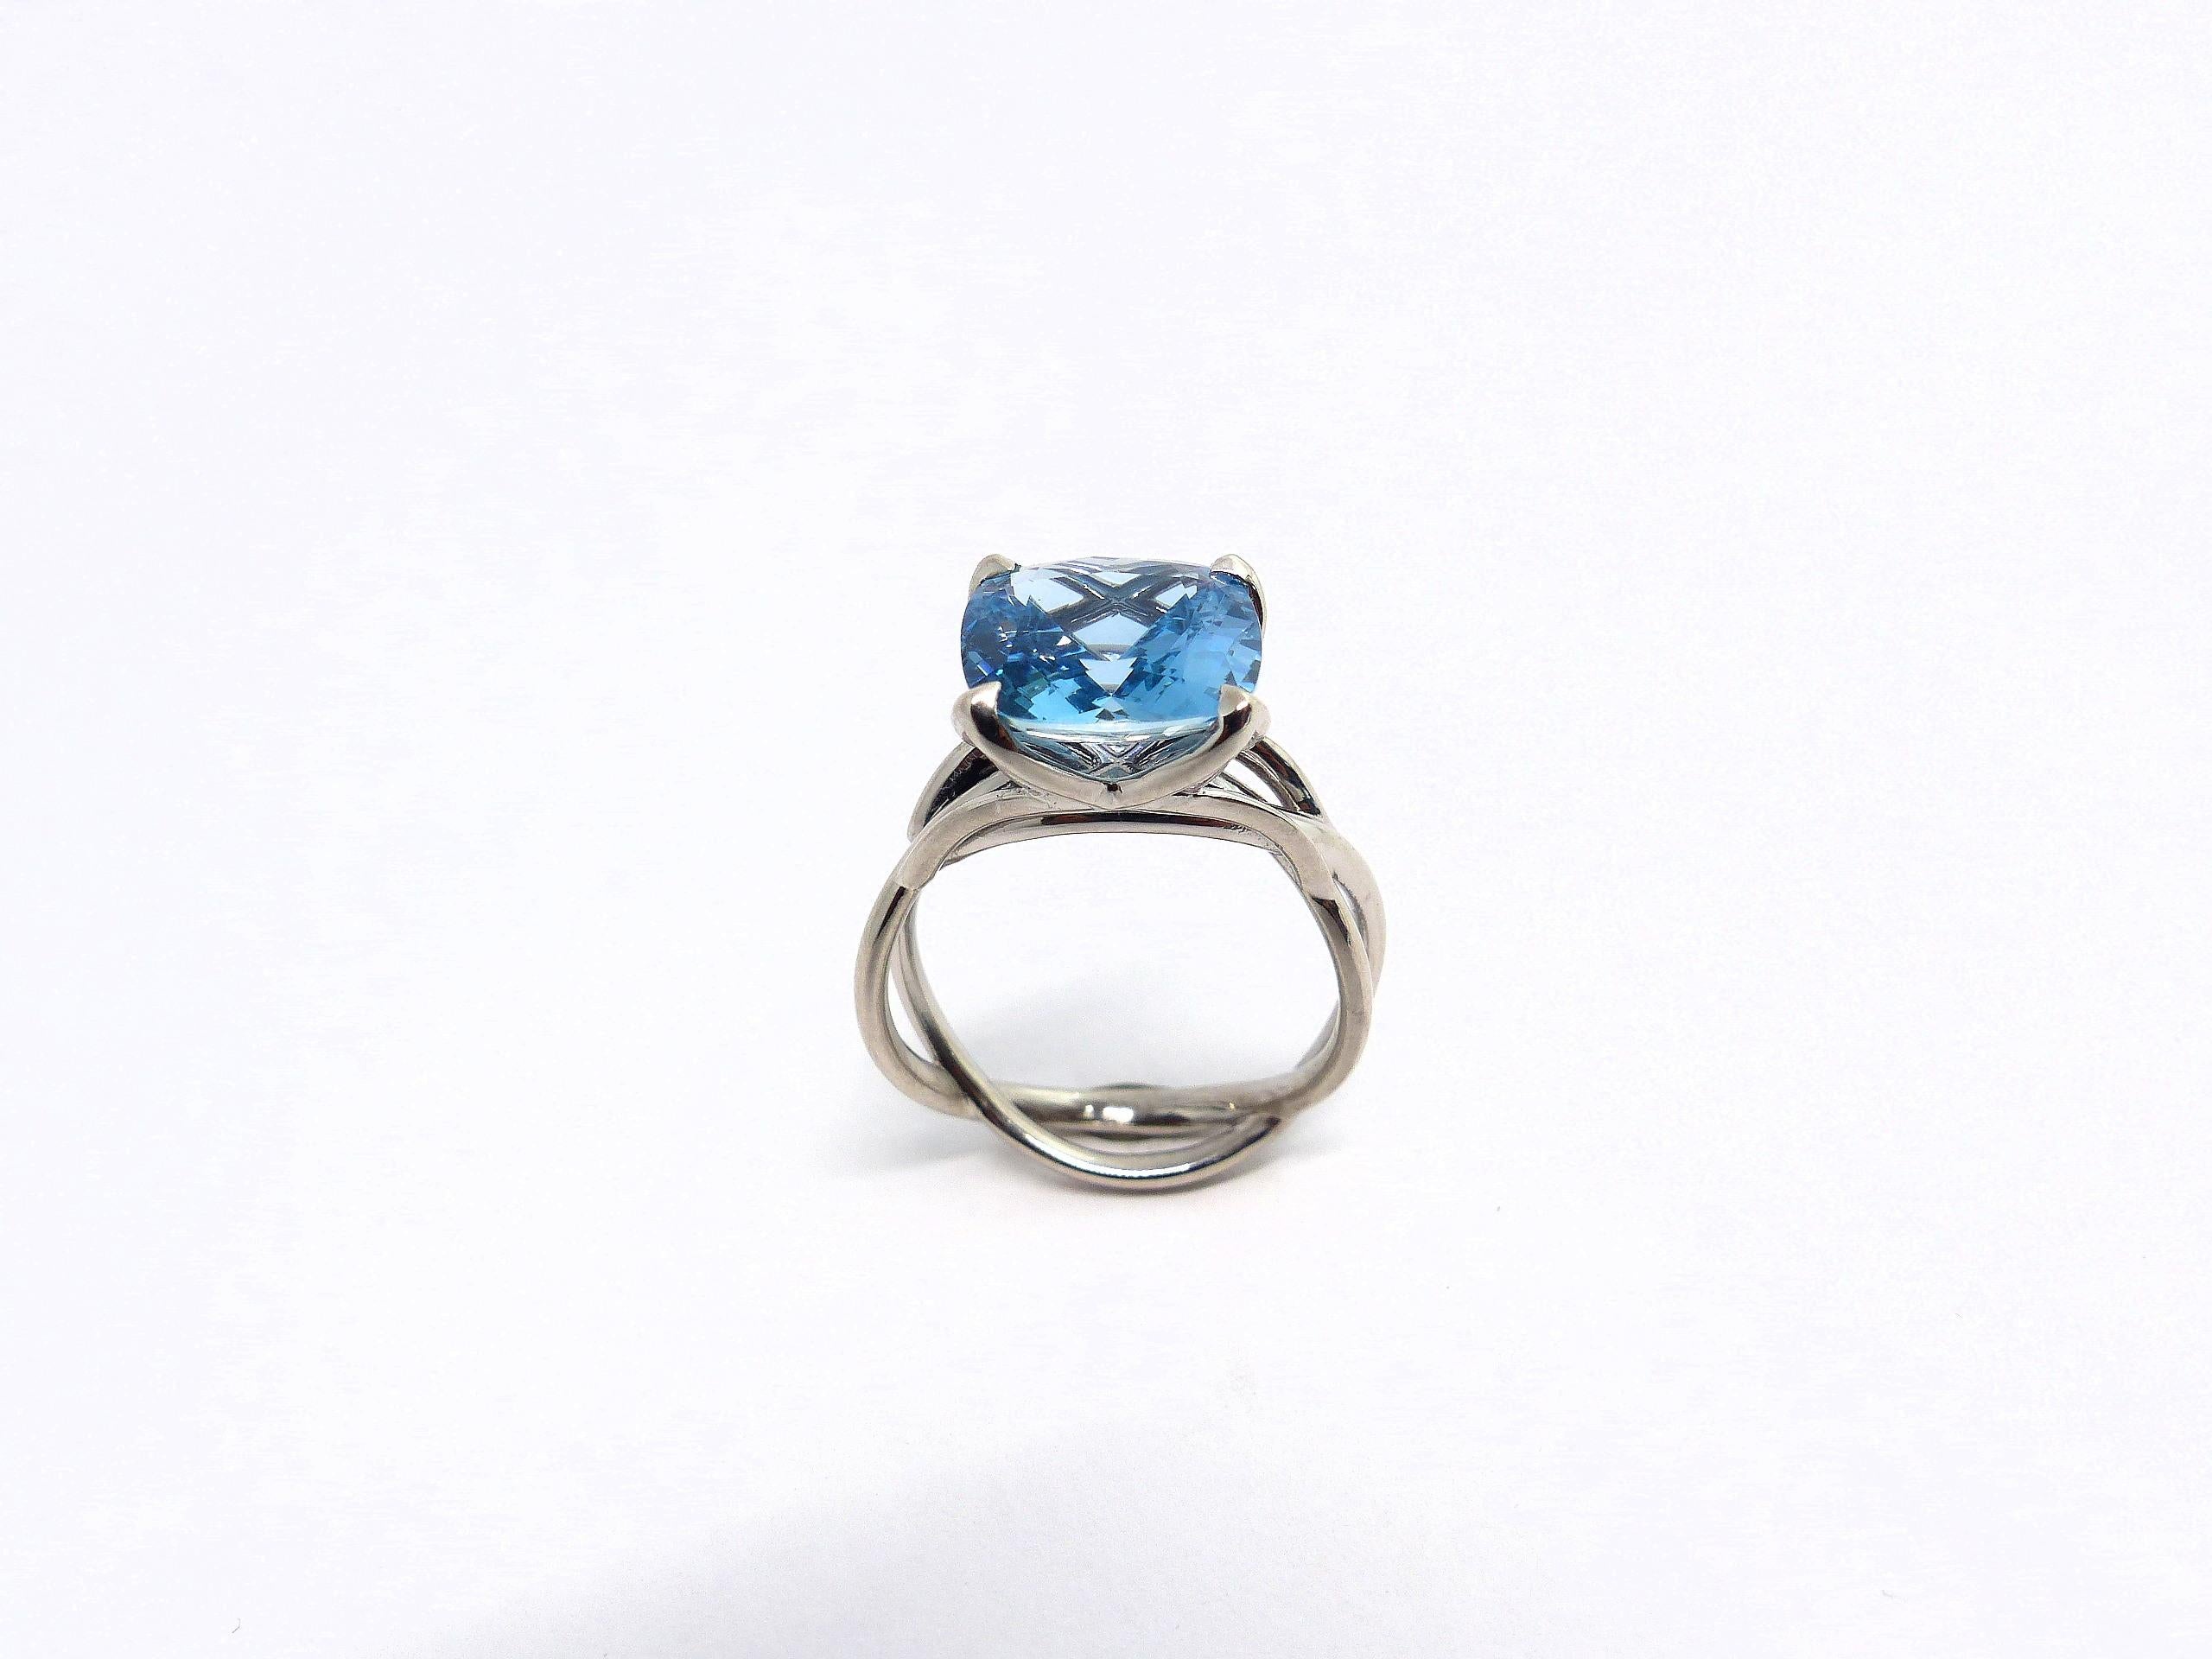 Women's Ring in White Gold with 1 Aquamarine Cushion Shape 11x11mm. For Sale